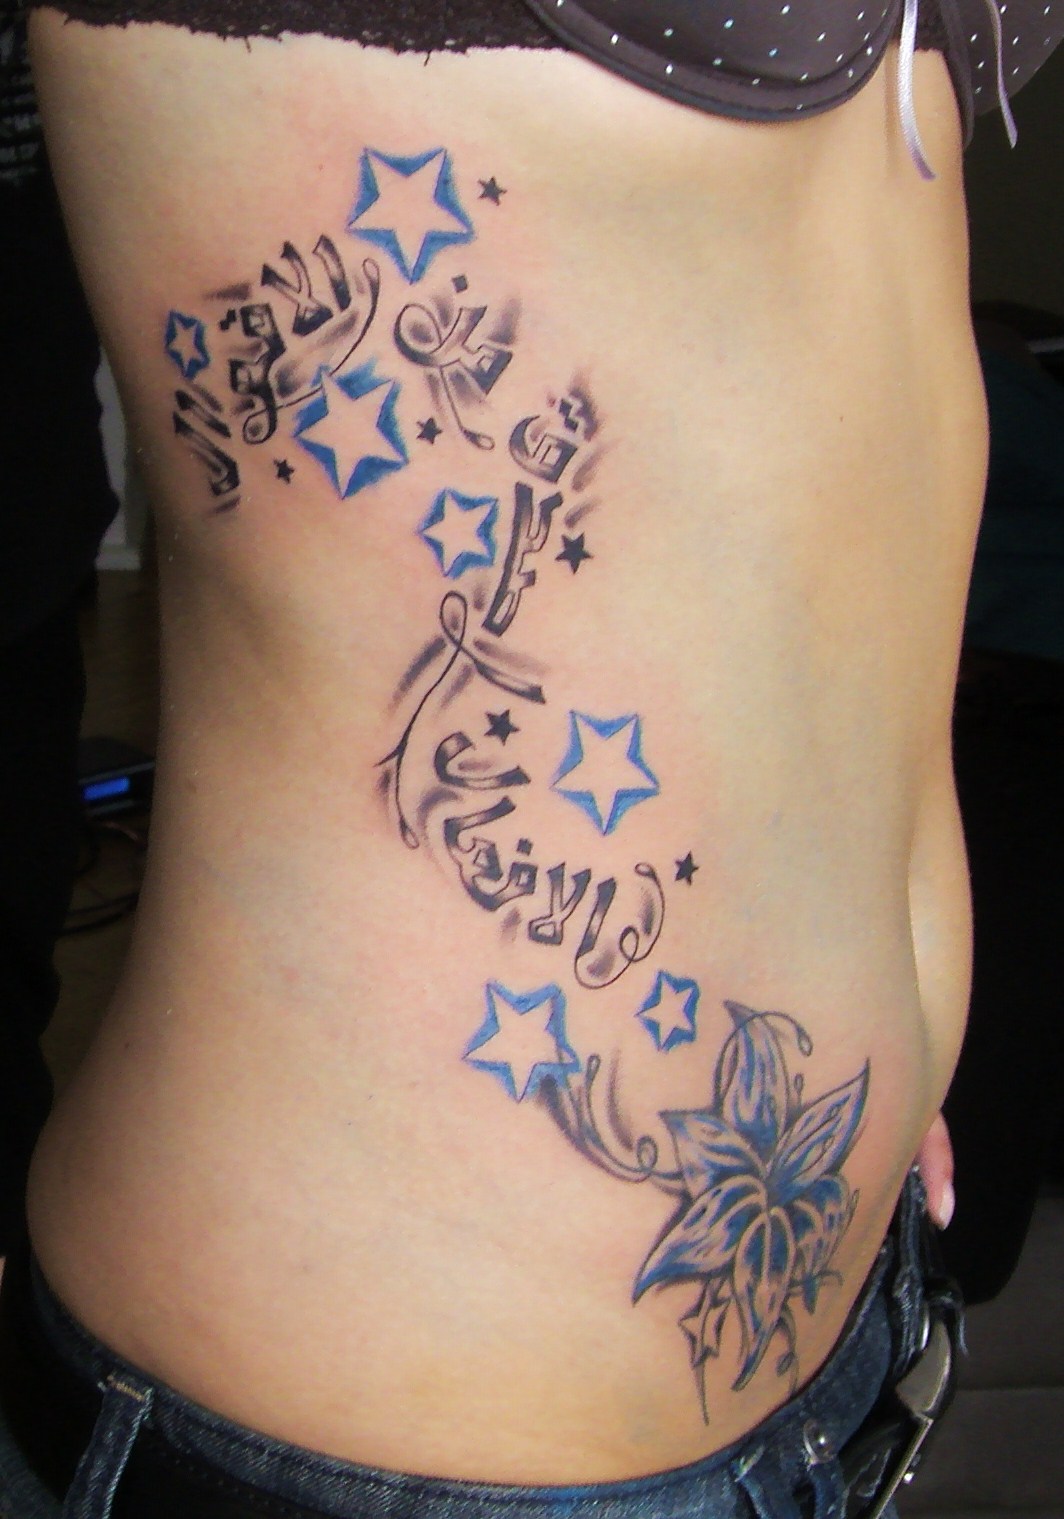 Flower and star tattoo